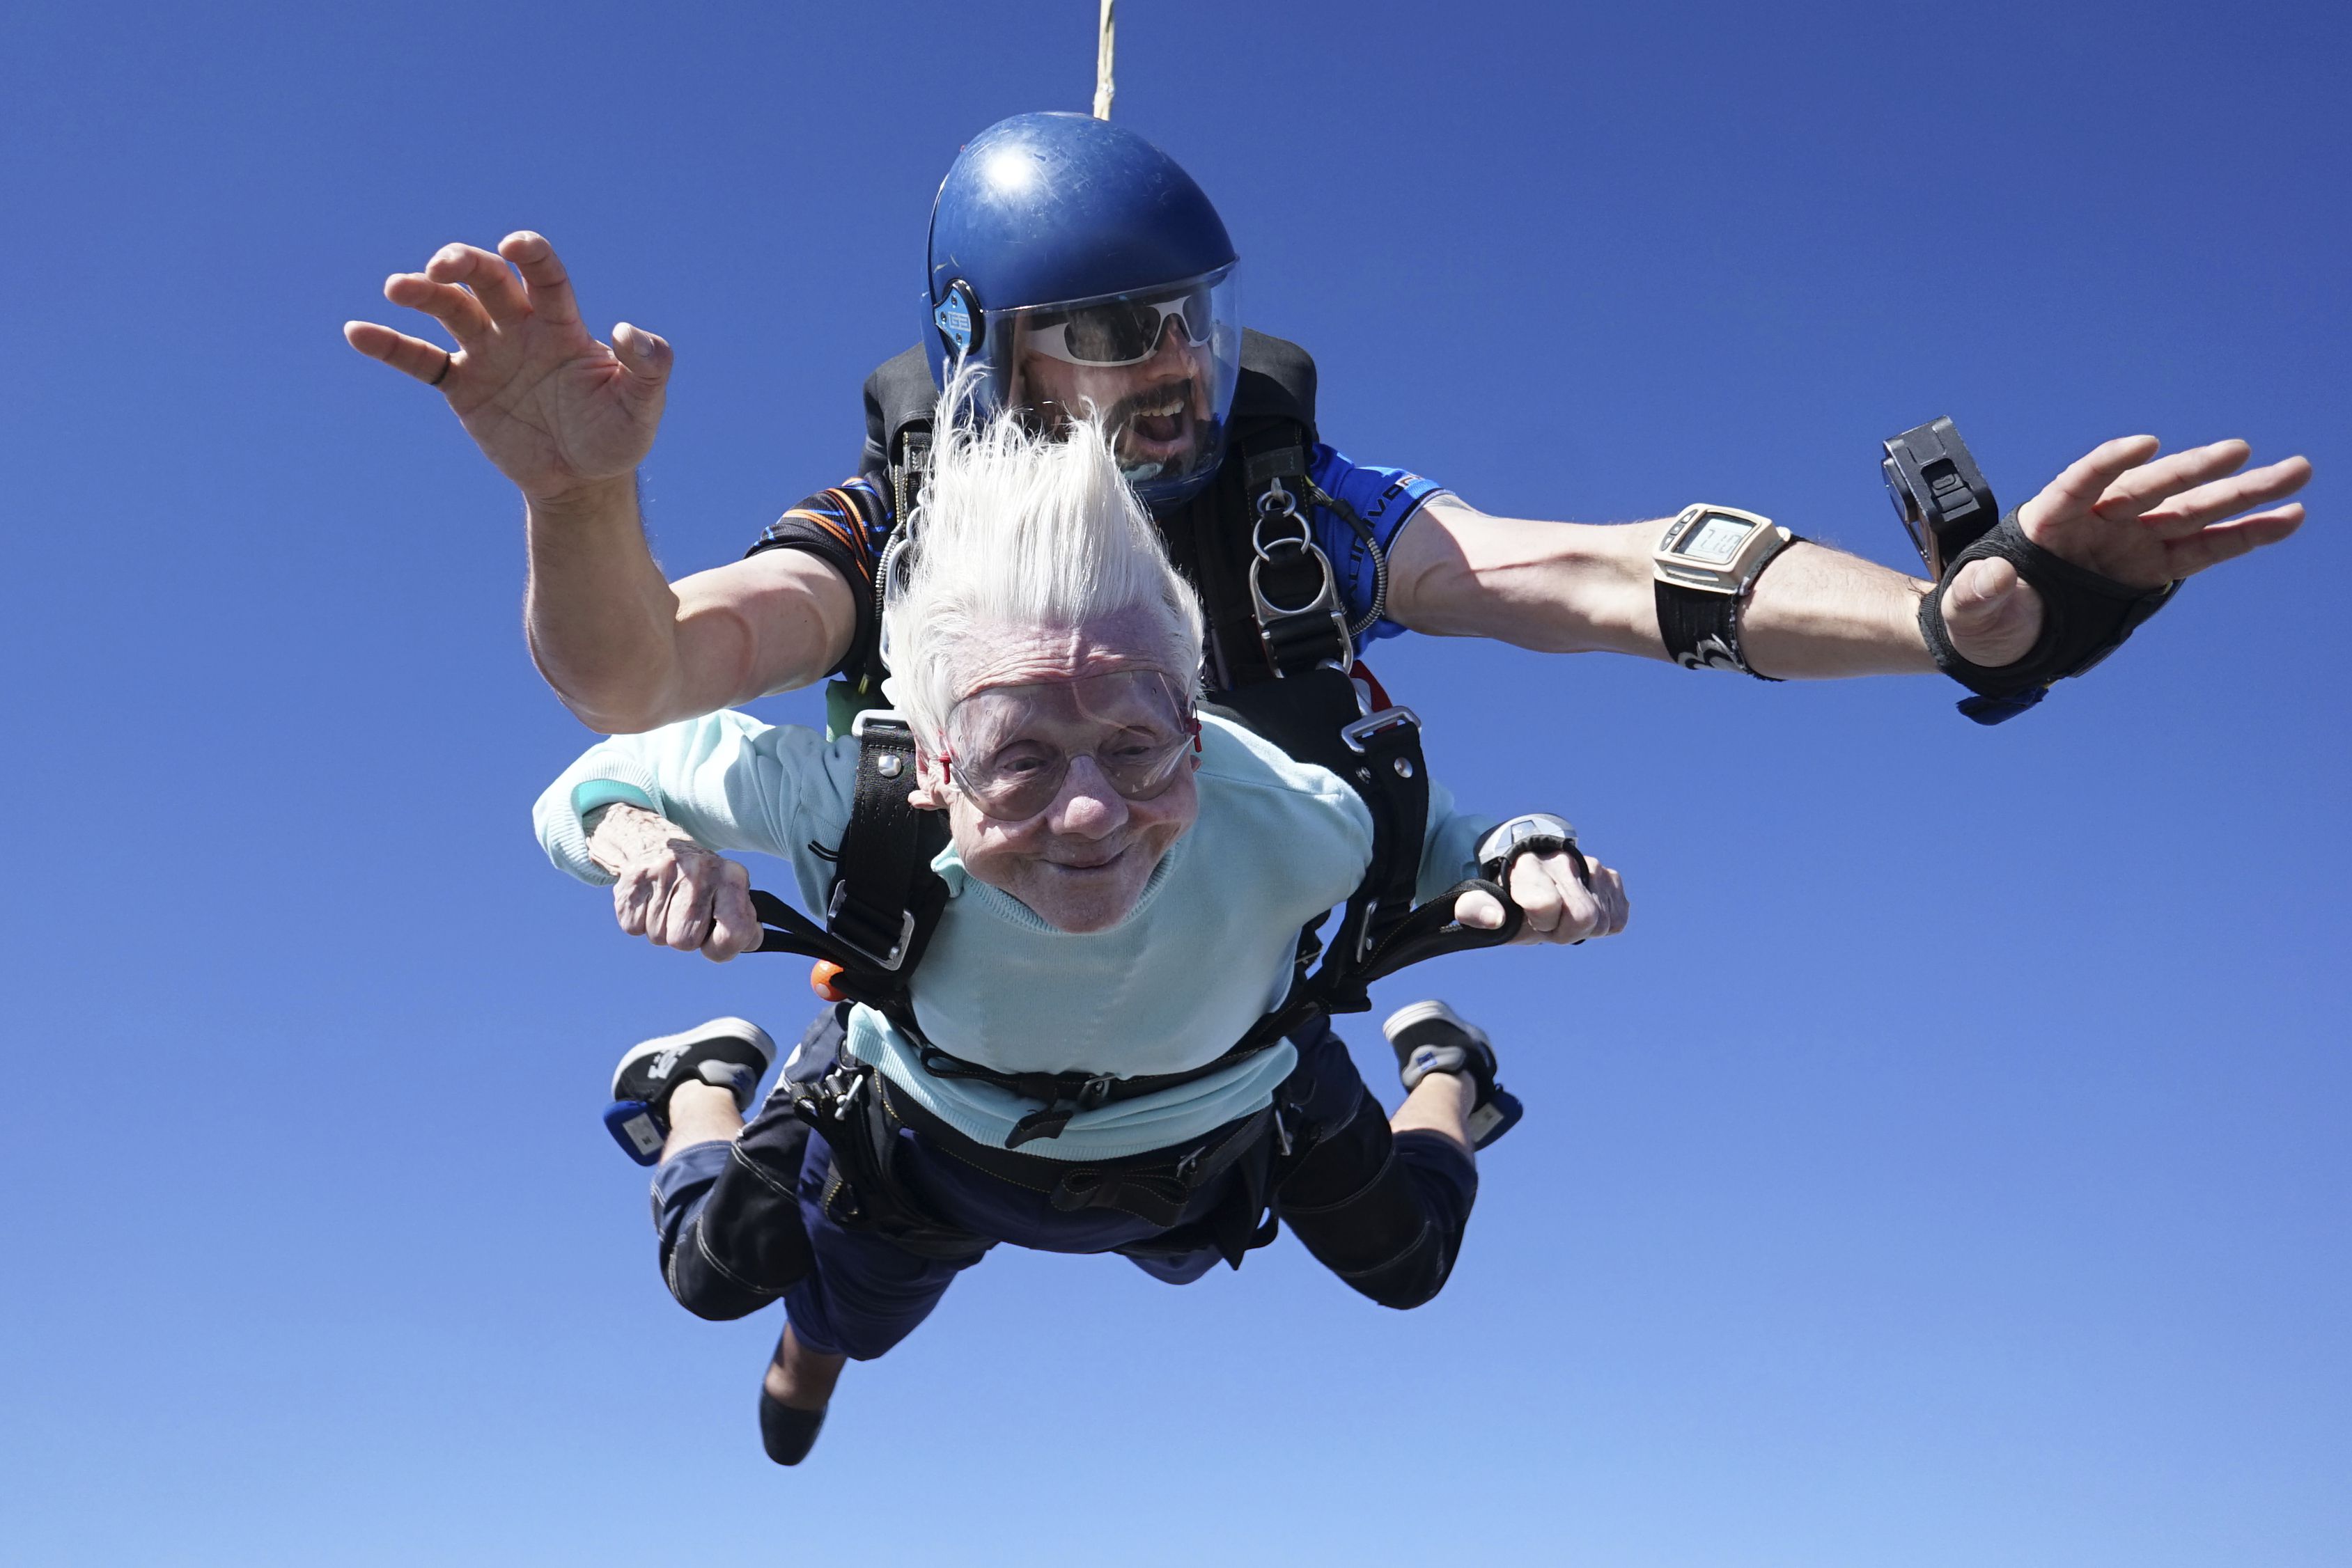 Dorothy Hoffner during her skydive with instructor Derek Baxter that made her the oldest person in the world to do so (Daniel Wilsey via AP)